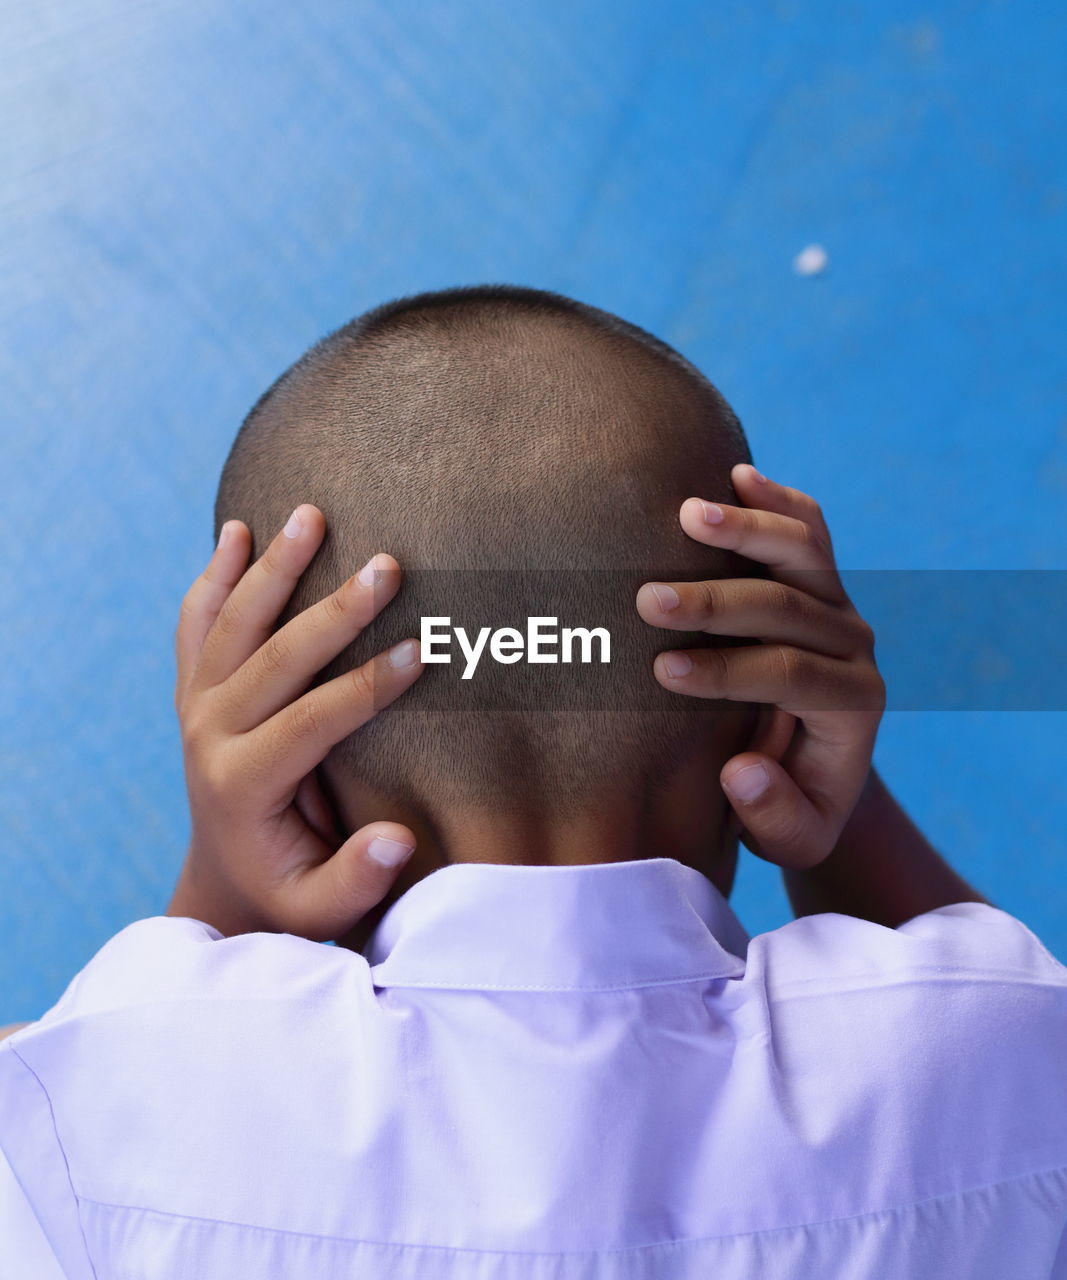 Rear view of boy covering ears against blue wall